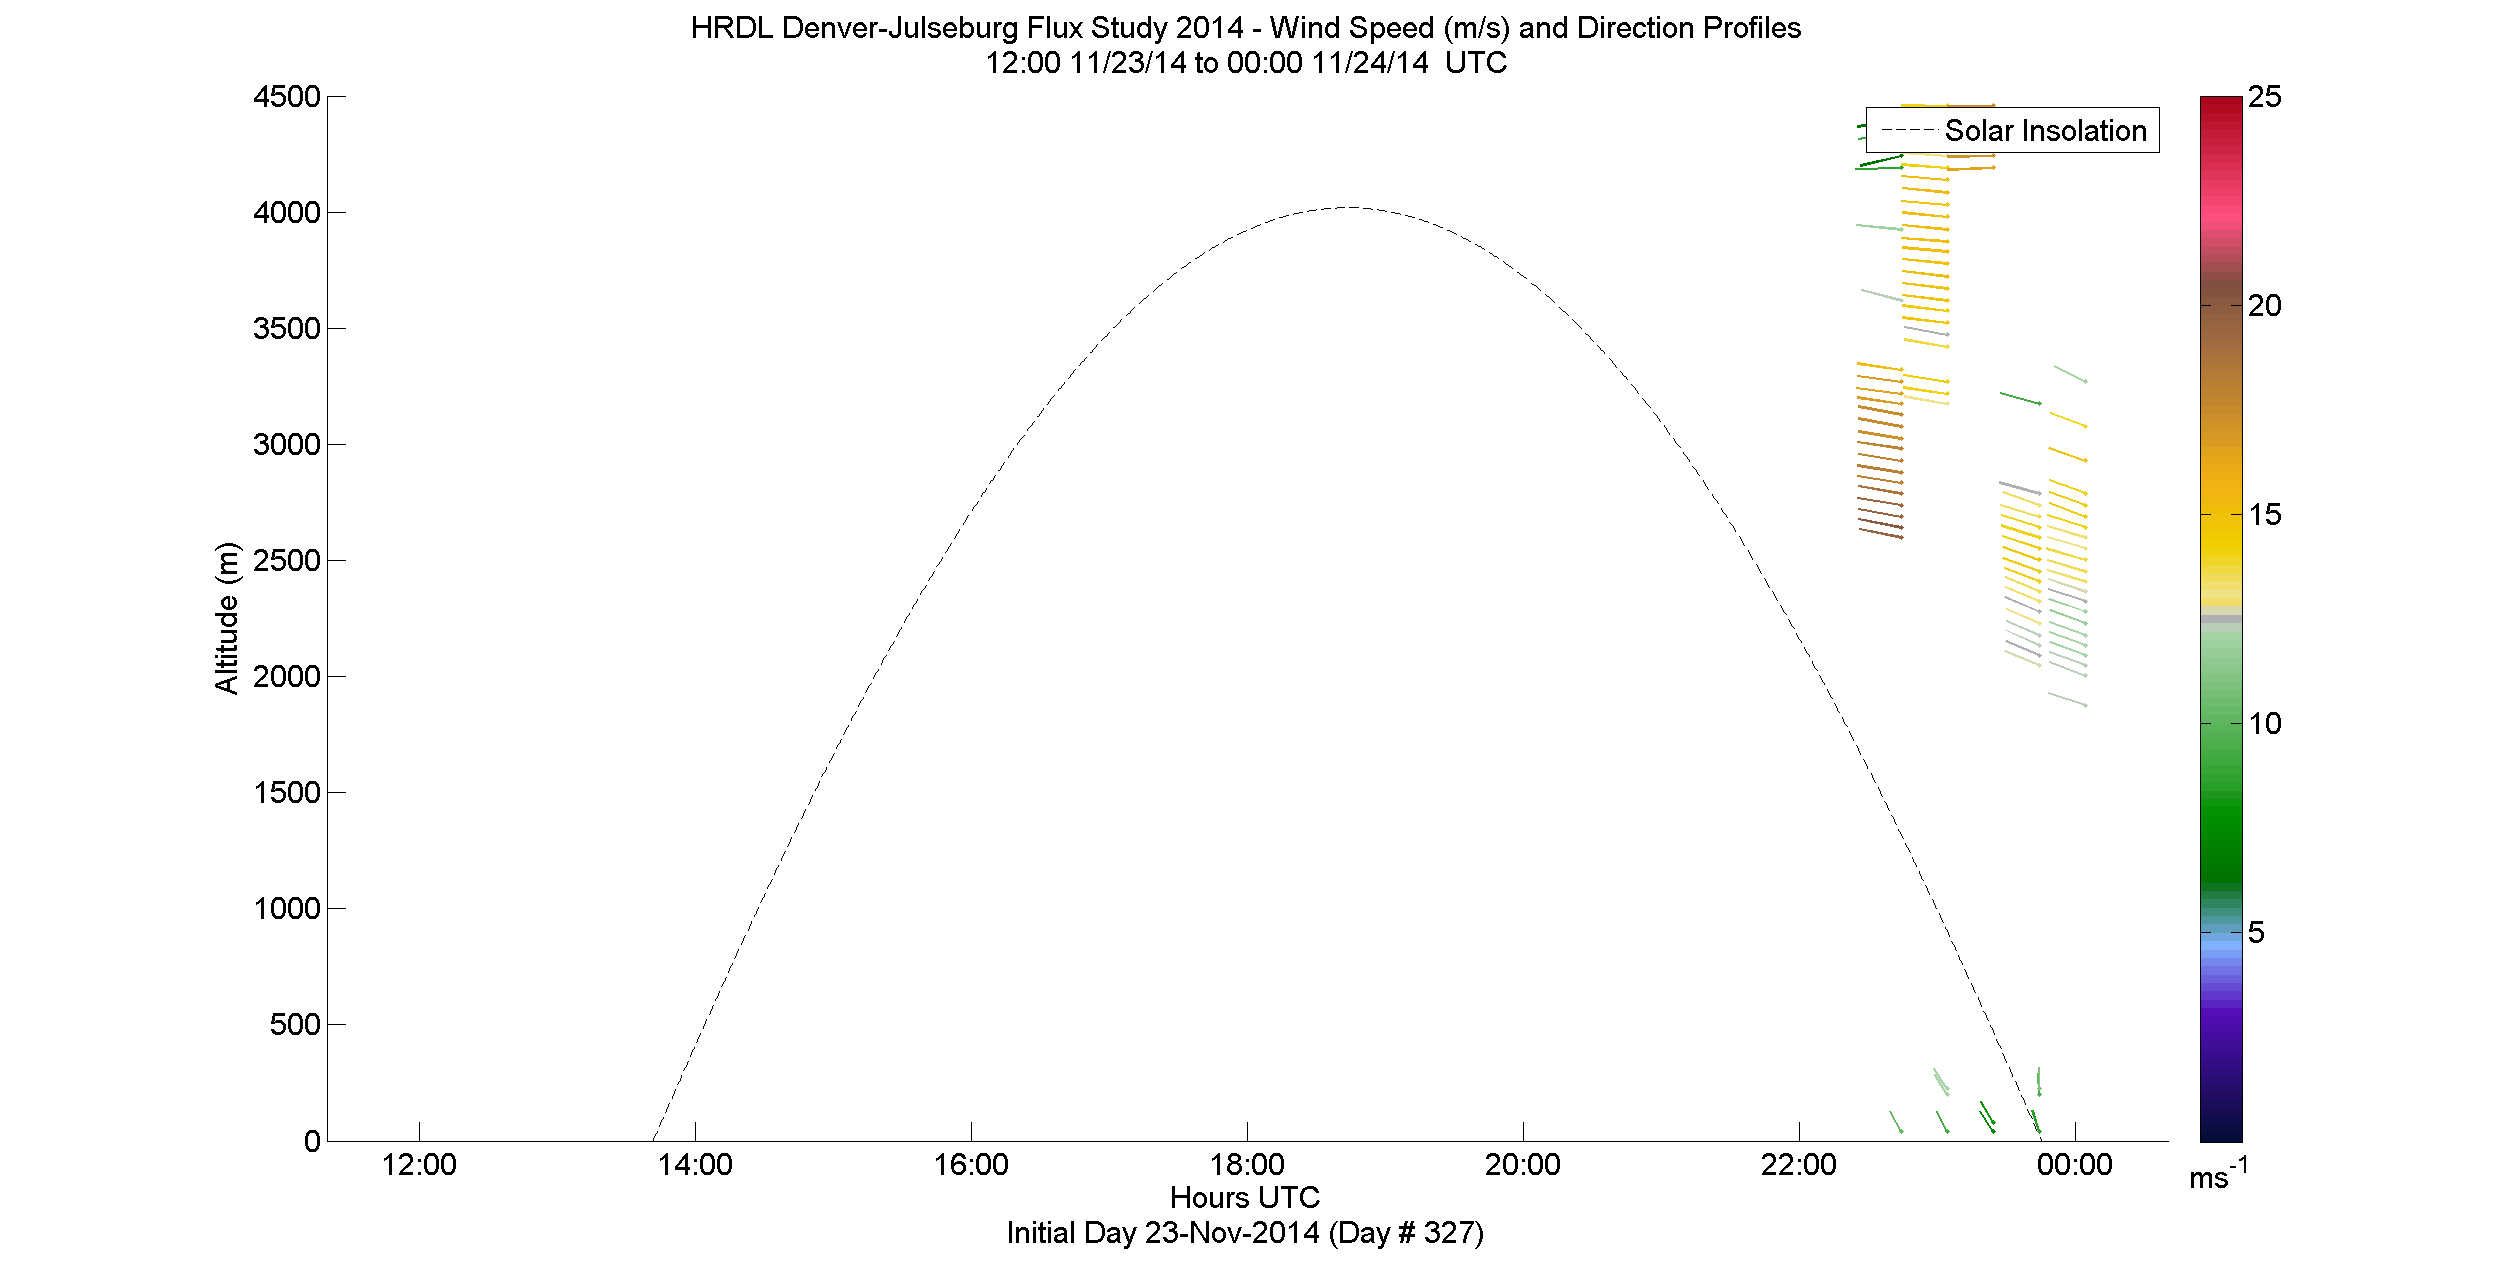 HRDL speed and direction profile - November 23 pm